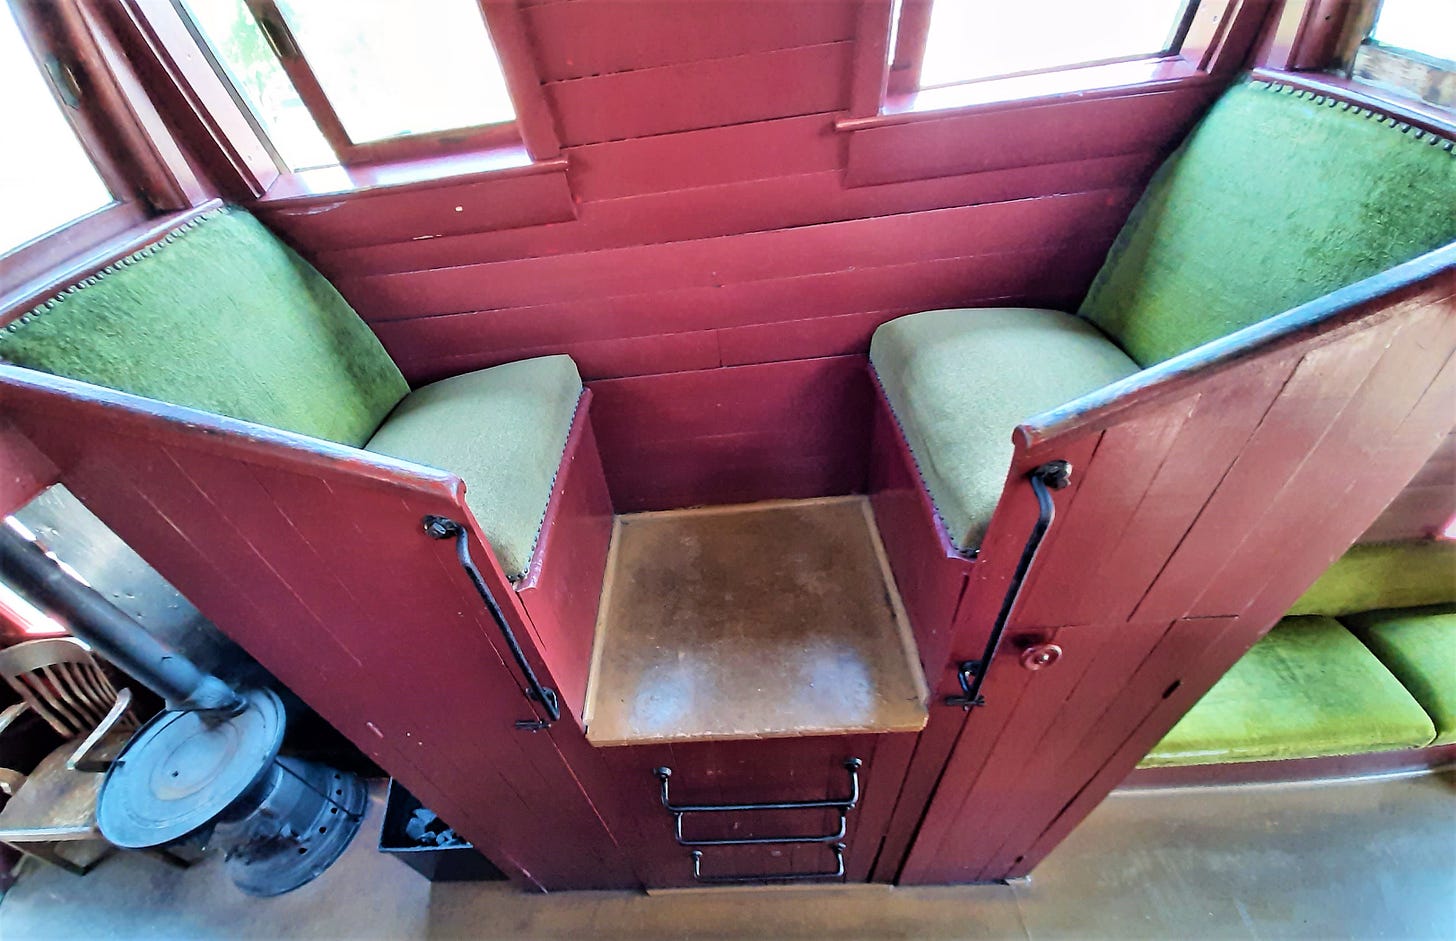 Two green velvet chairs in the caboose.